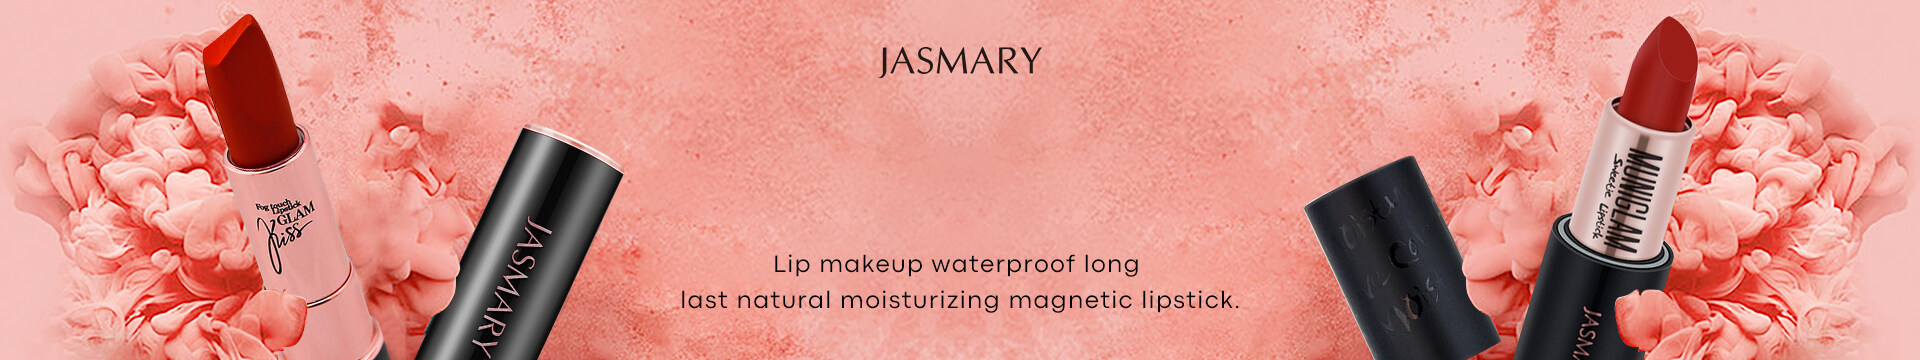 2019 JASMARY New Product Brightening and Concealing Brilliant Red Highlighting Powder,2020 Mineral Compact Face Waterproof Oem Sweet Skin Water Glow Pact Press Powder,Makeup manufacturer long last waterproof non-blooming concealer contour stick bronzer highlighter